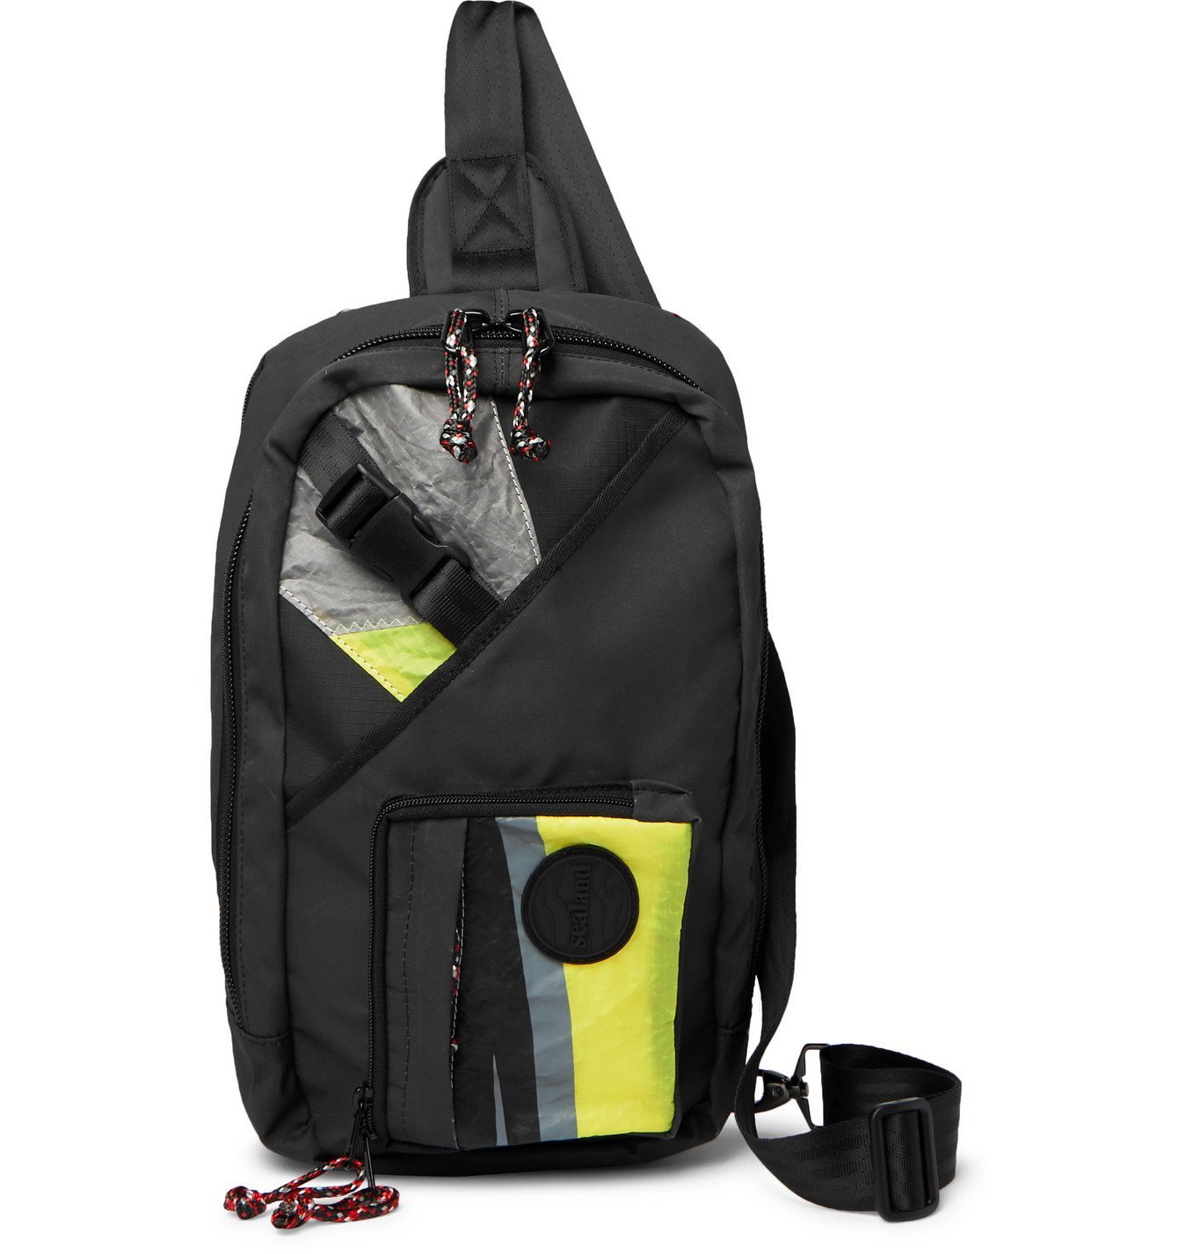 Sealand Gear - Bloc Ripstop, Nylon-Canvas and Spinnaker Sling Backpack ...